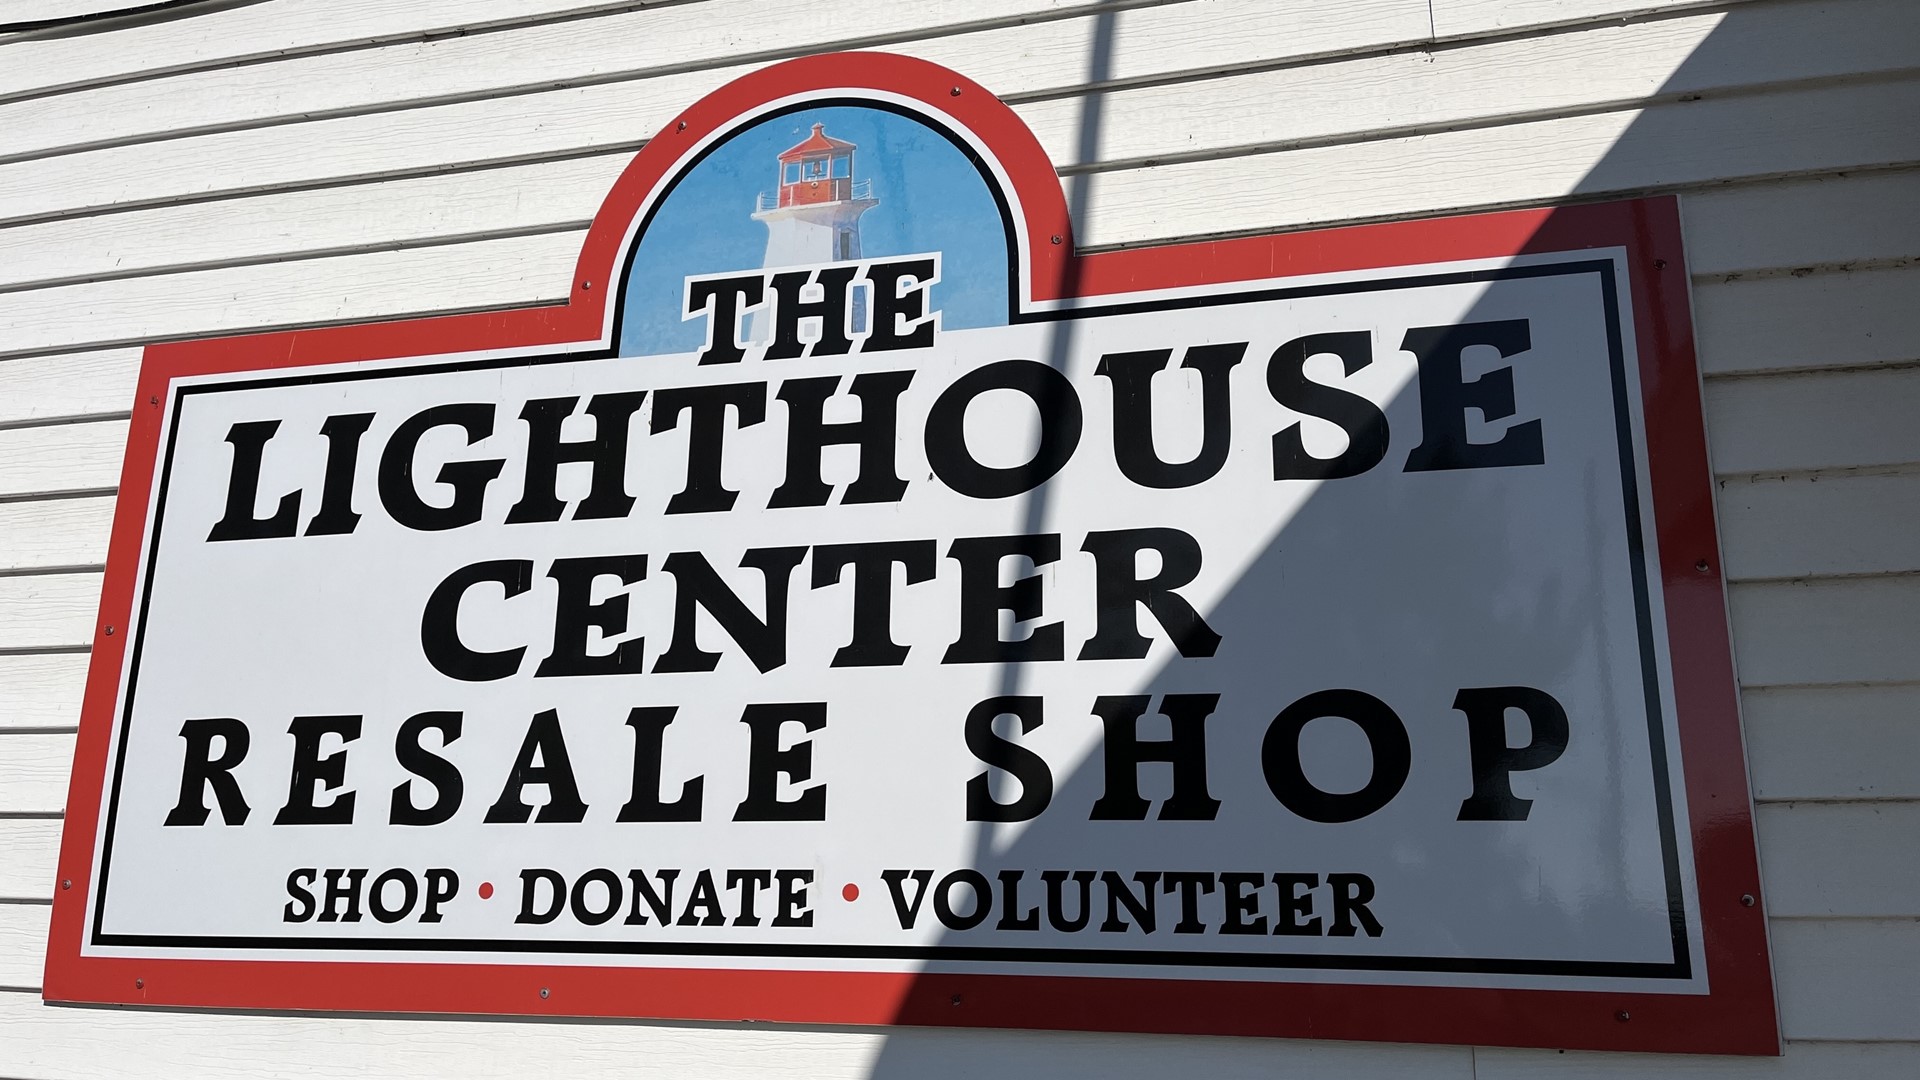 The Lighthouse Center Resale Shop in Gypsum helps feed an average of 50 families a week.